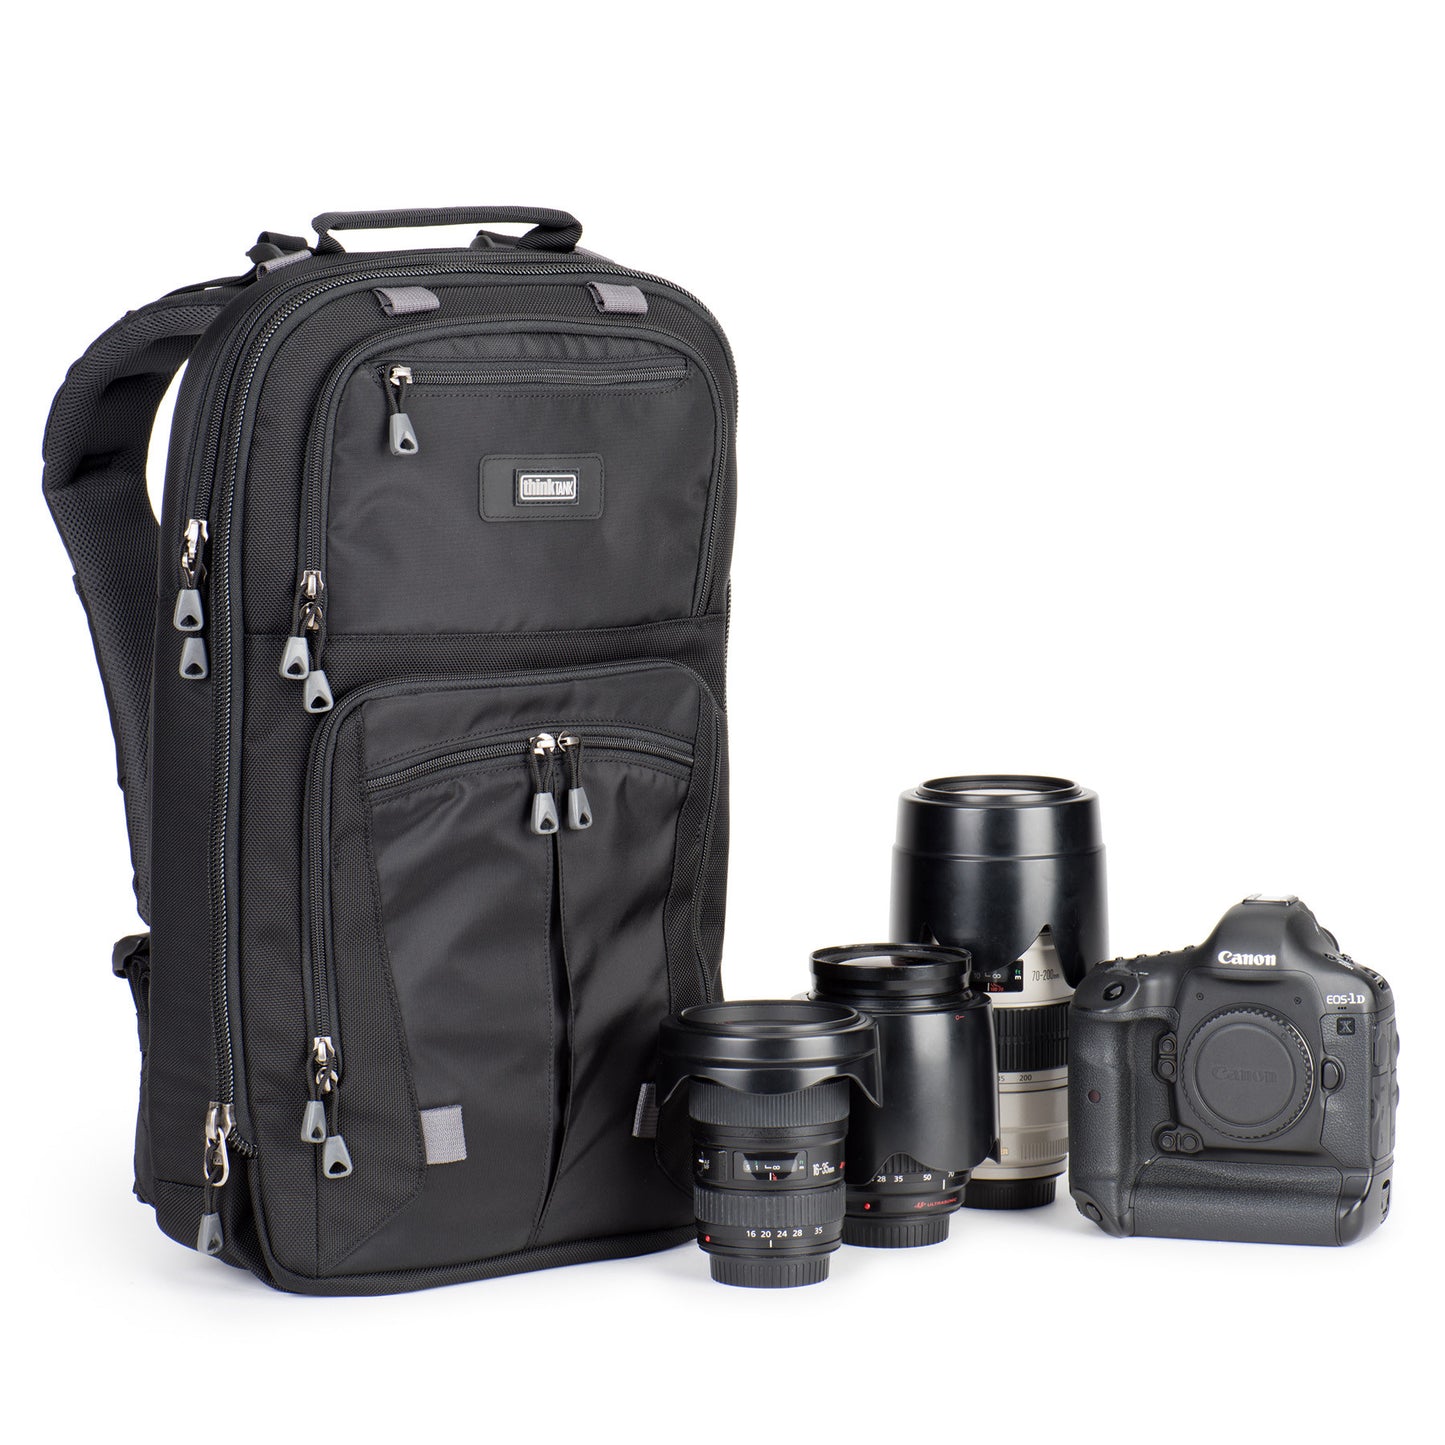 Shape Shifter 17 - Expandable Photography Backpack fits 17